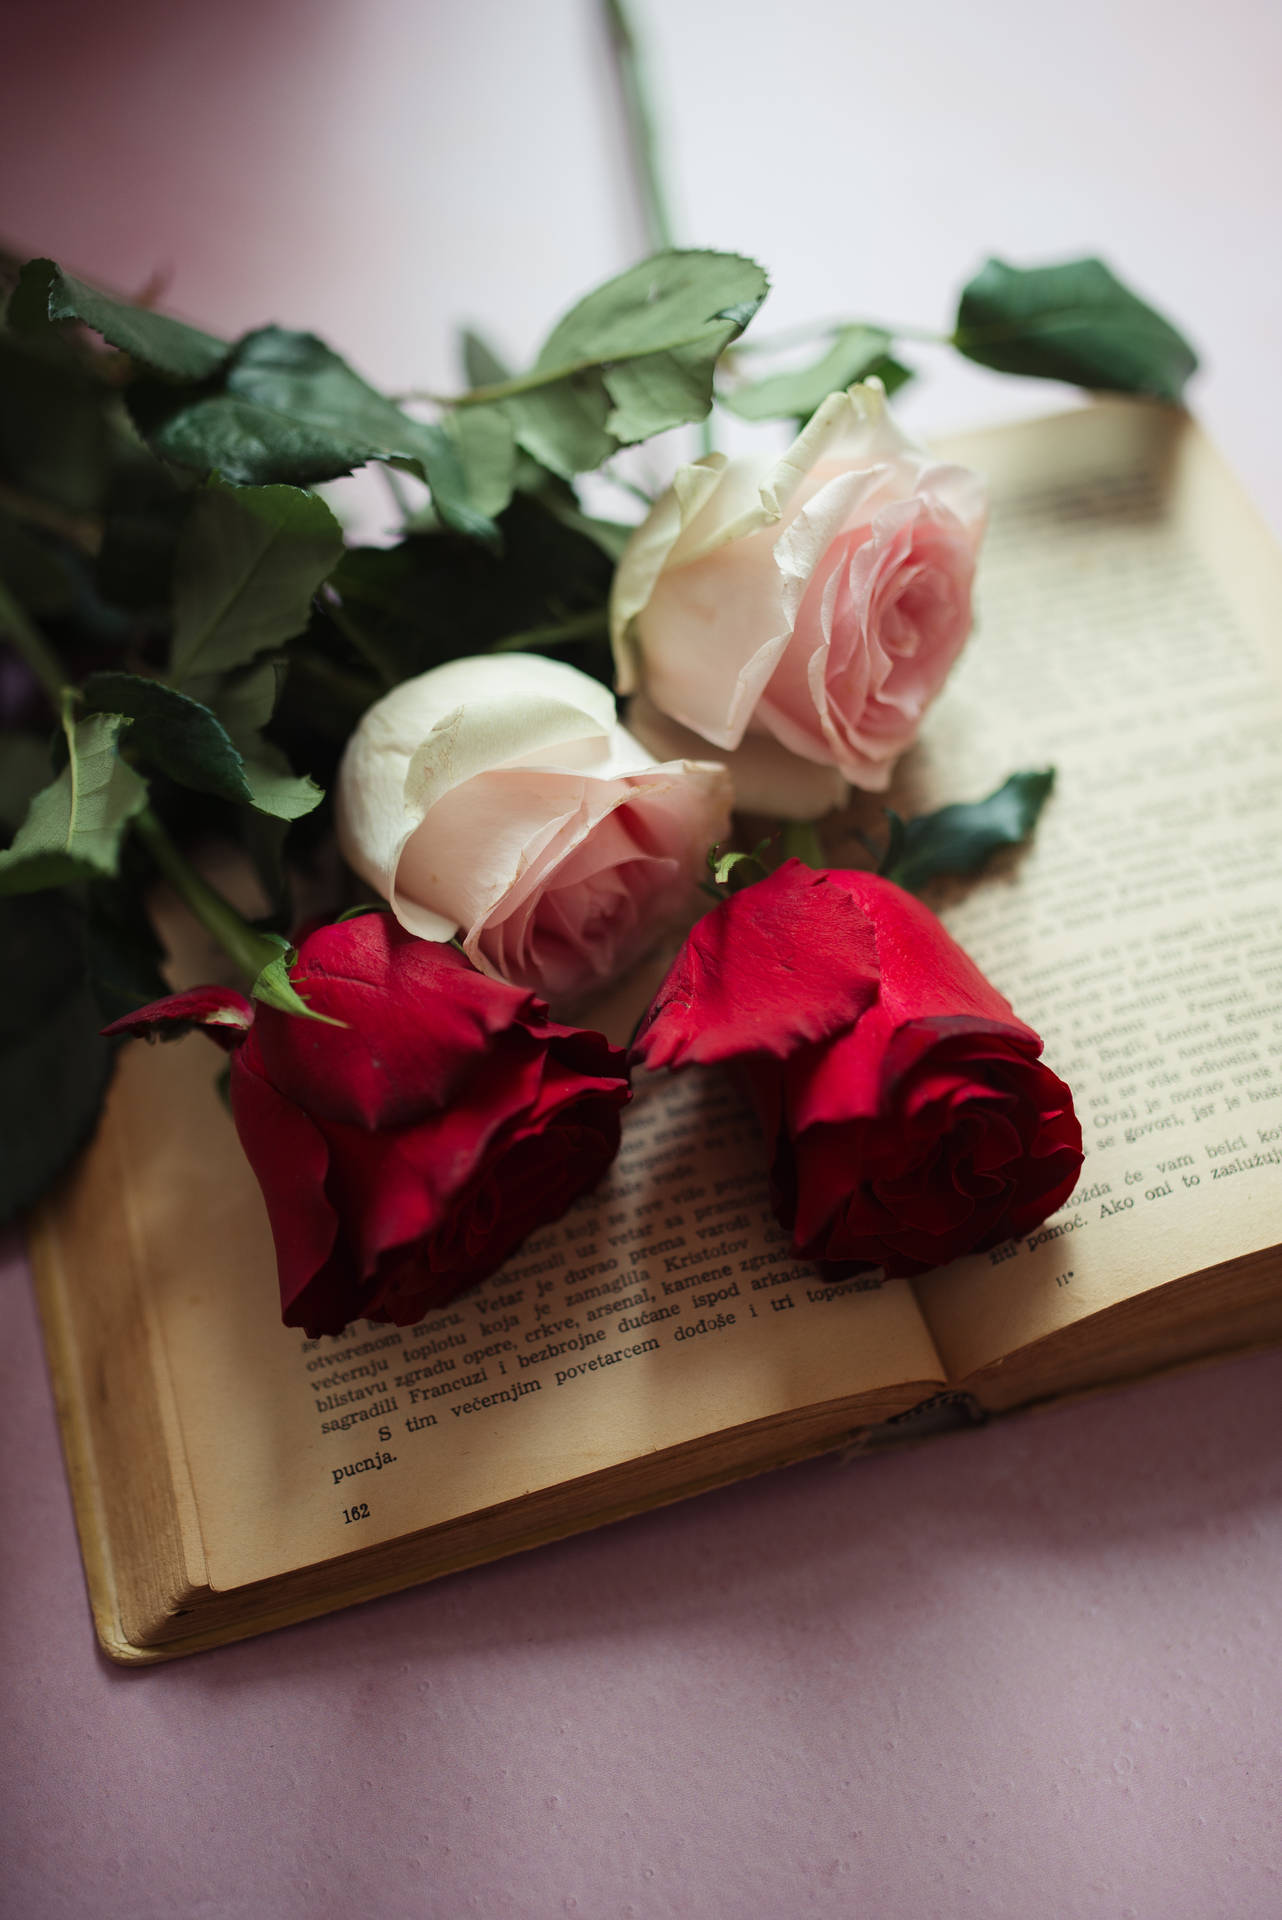 Aesthetic Rose Flowers On A Book Wallpaper